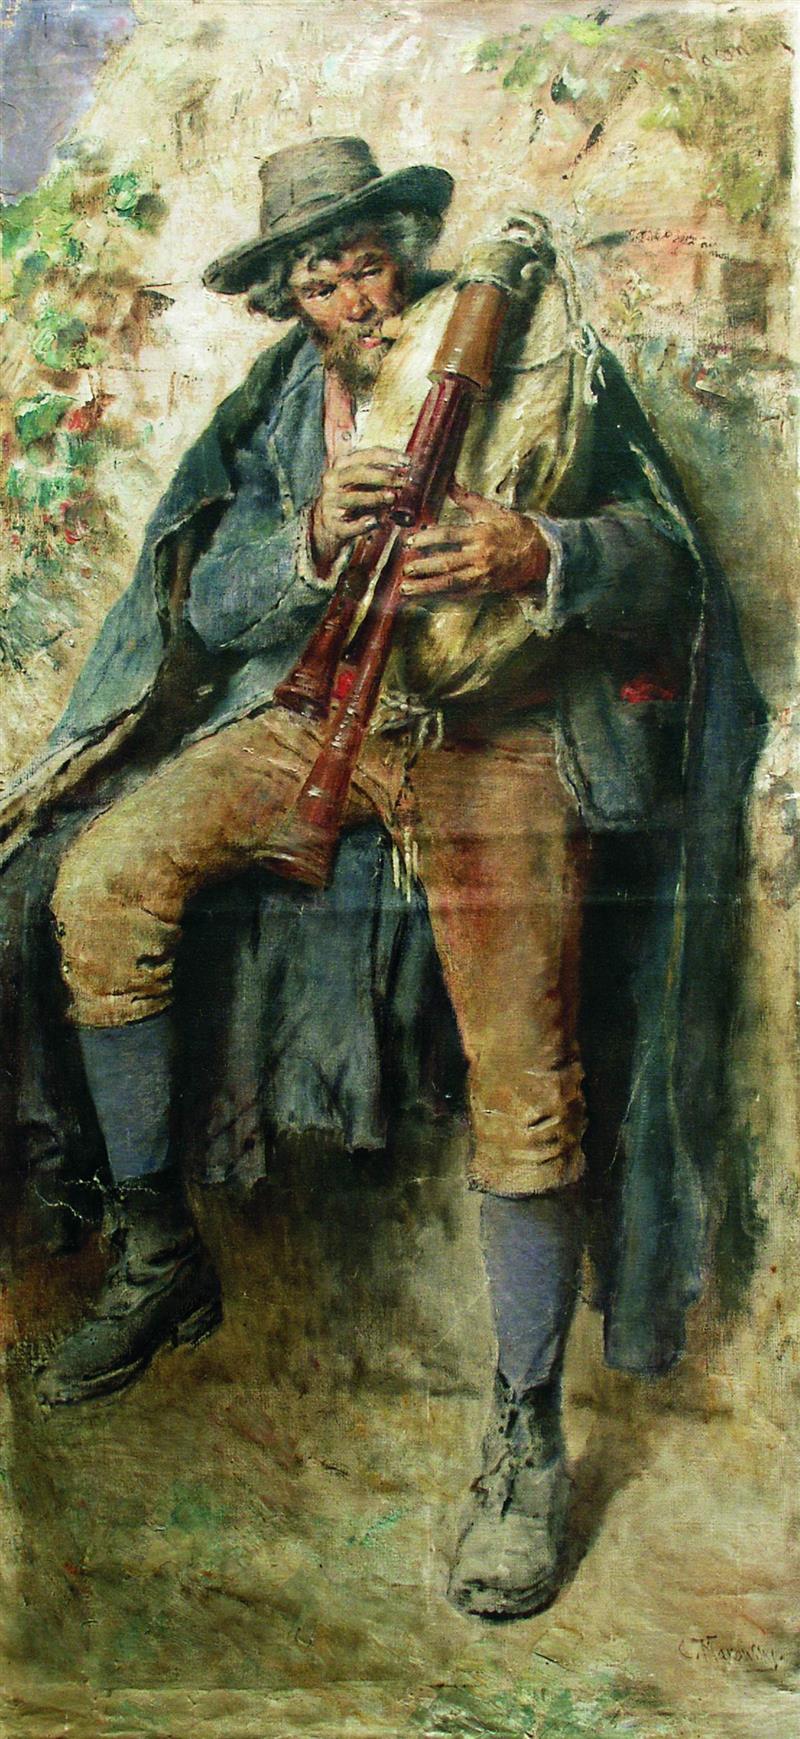 The Bagpipe Player